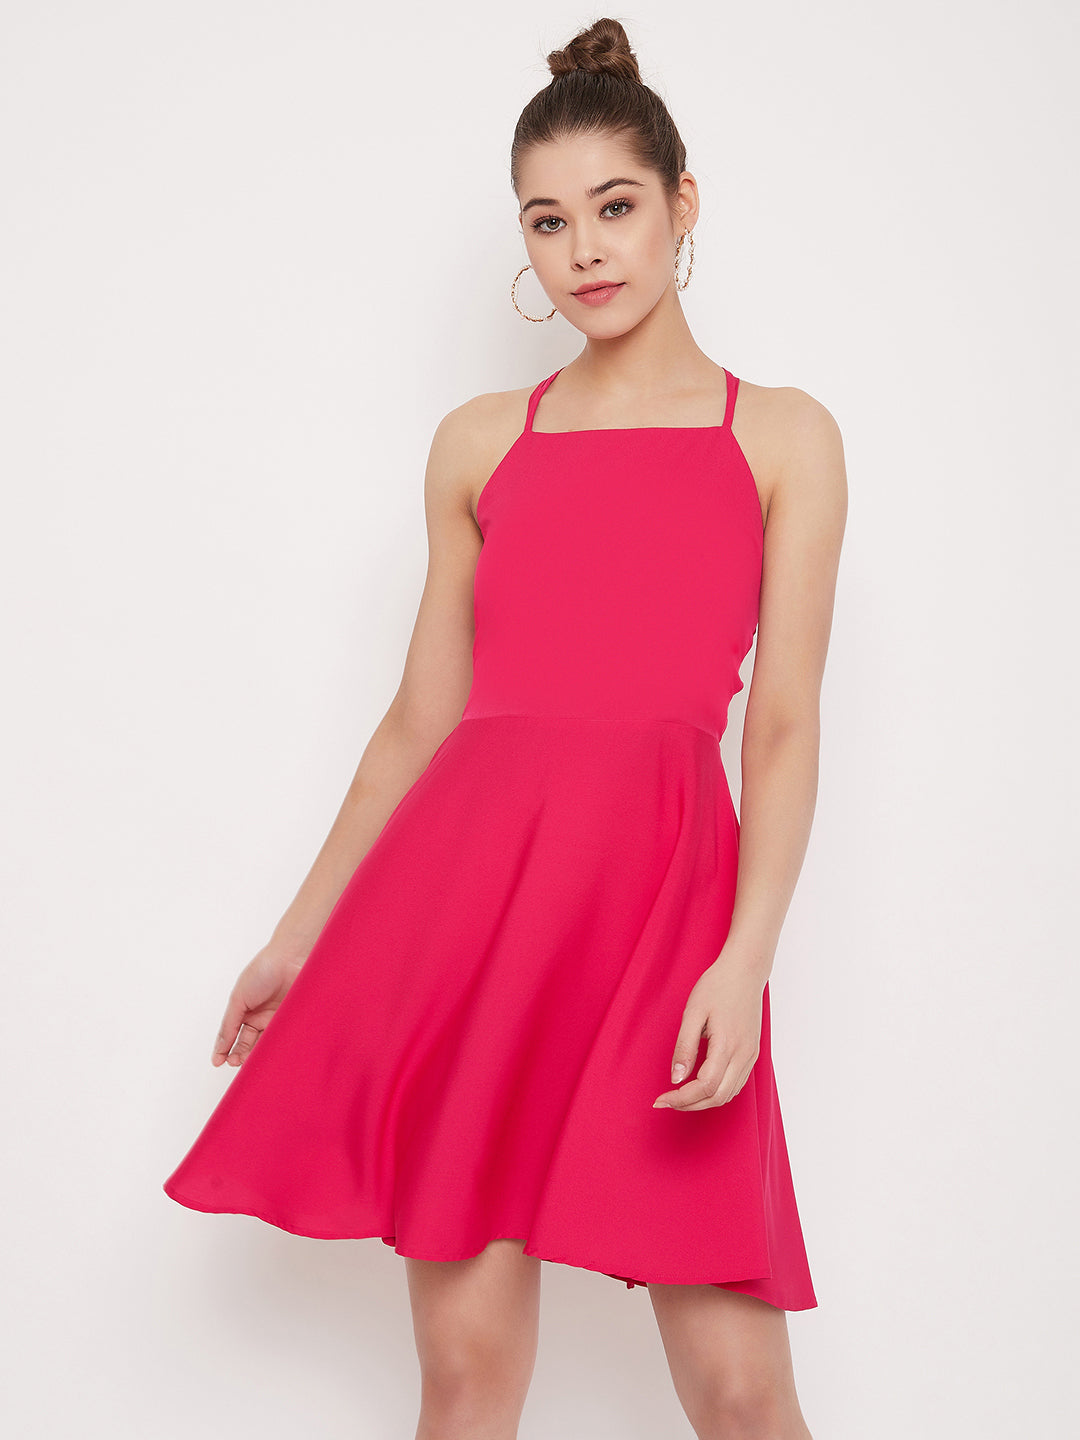 Berrylush Women Solid Fuschia Pink Caged Back Tie-up Fit & Flare Mini Dress